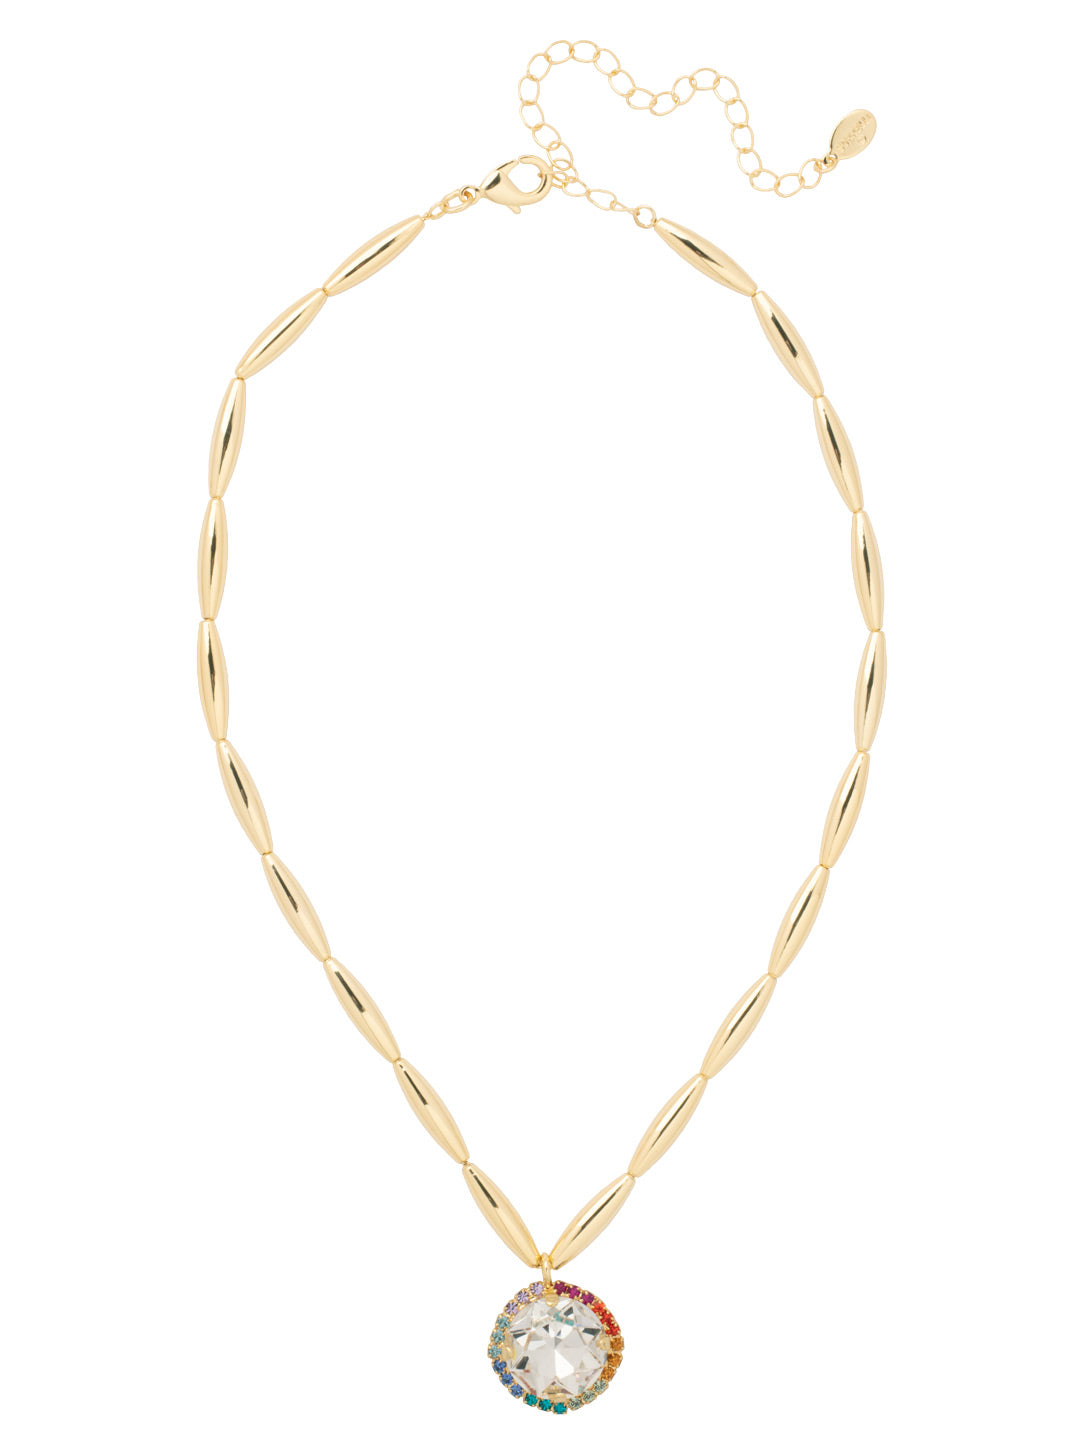 Giselle Pendant Necklace - 8NA4BGPRI - <p>The Giselle Pendant Necklace features a bold round halo cut crystal on an adjustable tubular style chain, secured in the back with a lobster claw clasp. From Sorrelli's Prism collection in our Bright Gold-tone finish.</p>